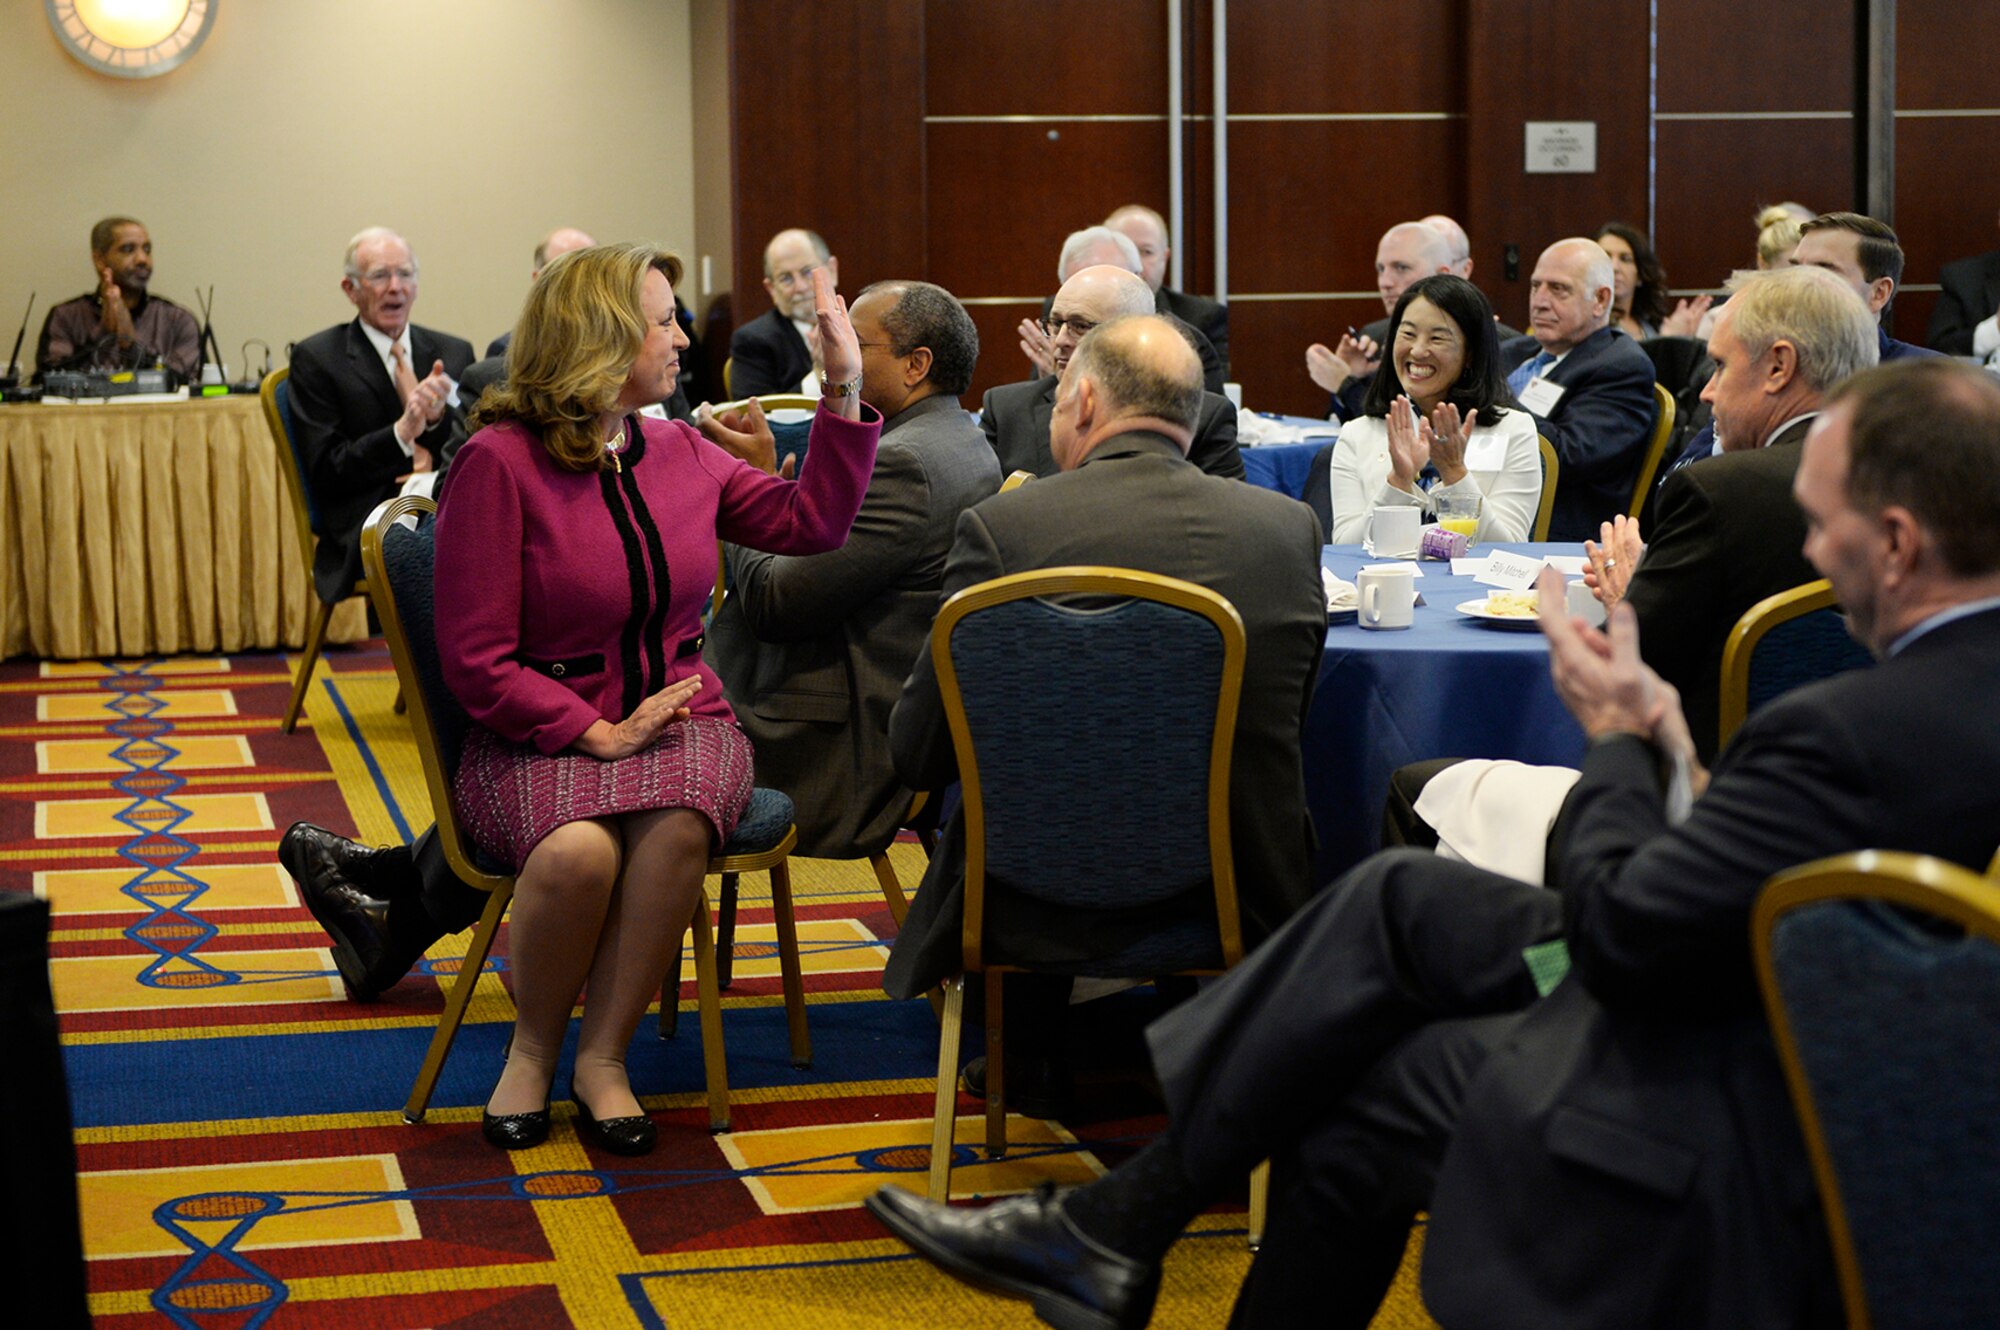 Air Force Secretary Deborah Lee James waves to attendees at the Air Force Association's Breakfast Series in Arlington, Va., Jan. 6, 2017. The Air Force Association's Breakfast Series brings together industry partners, the international attaché corps, and both military and civilian leadership for informative briefings on a monthly basis for updates on relevant current initiatives. (U.S. Air Force photo/Tech. Sgt. Joshua L. DeMotts)